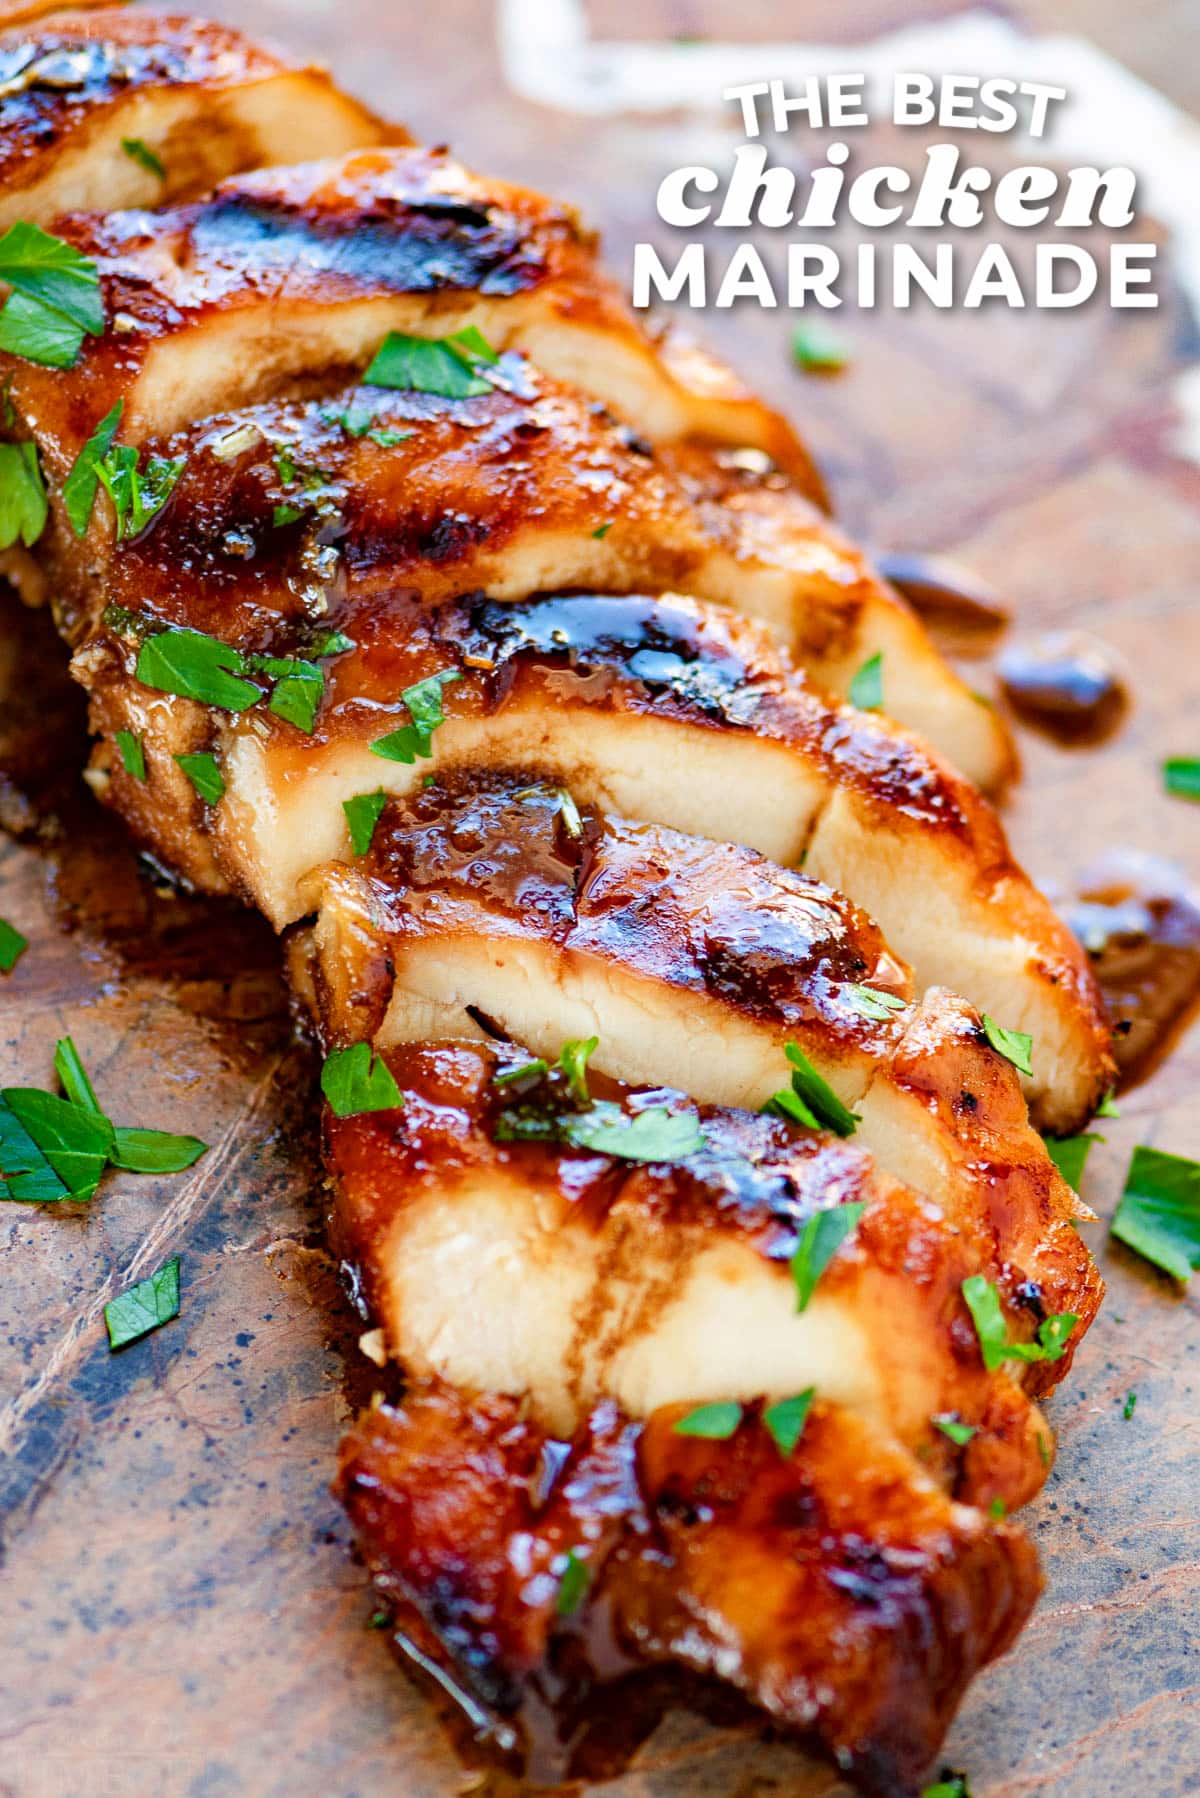 The BEST Chicken Marinade (For Grilling or Baking) | Mom On Timeout